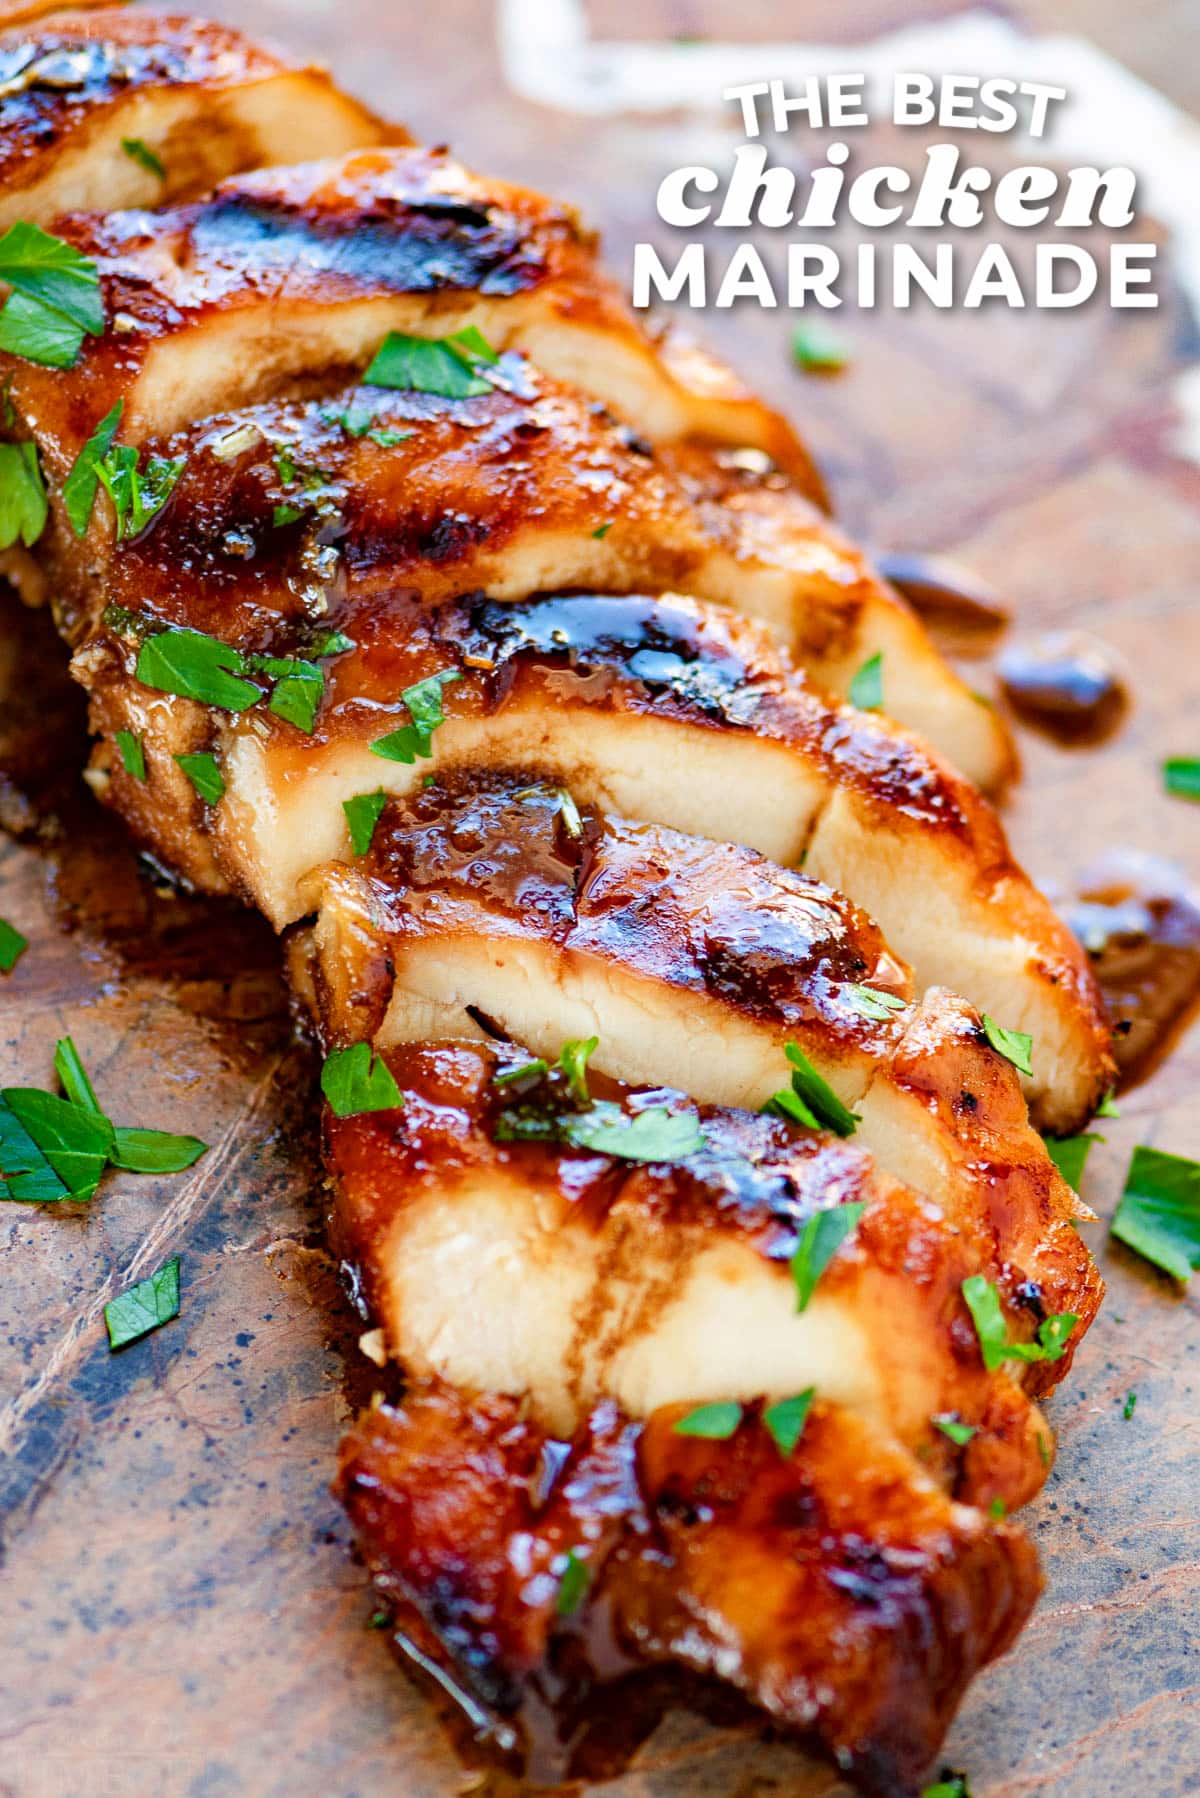 The BEST Chicken Marinade (For Grilling or Baking) | Mom On Timeout